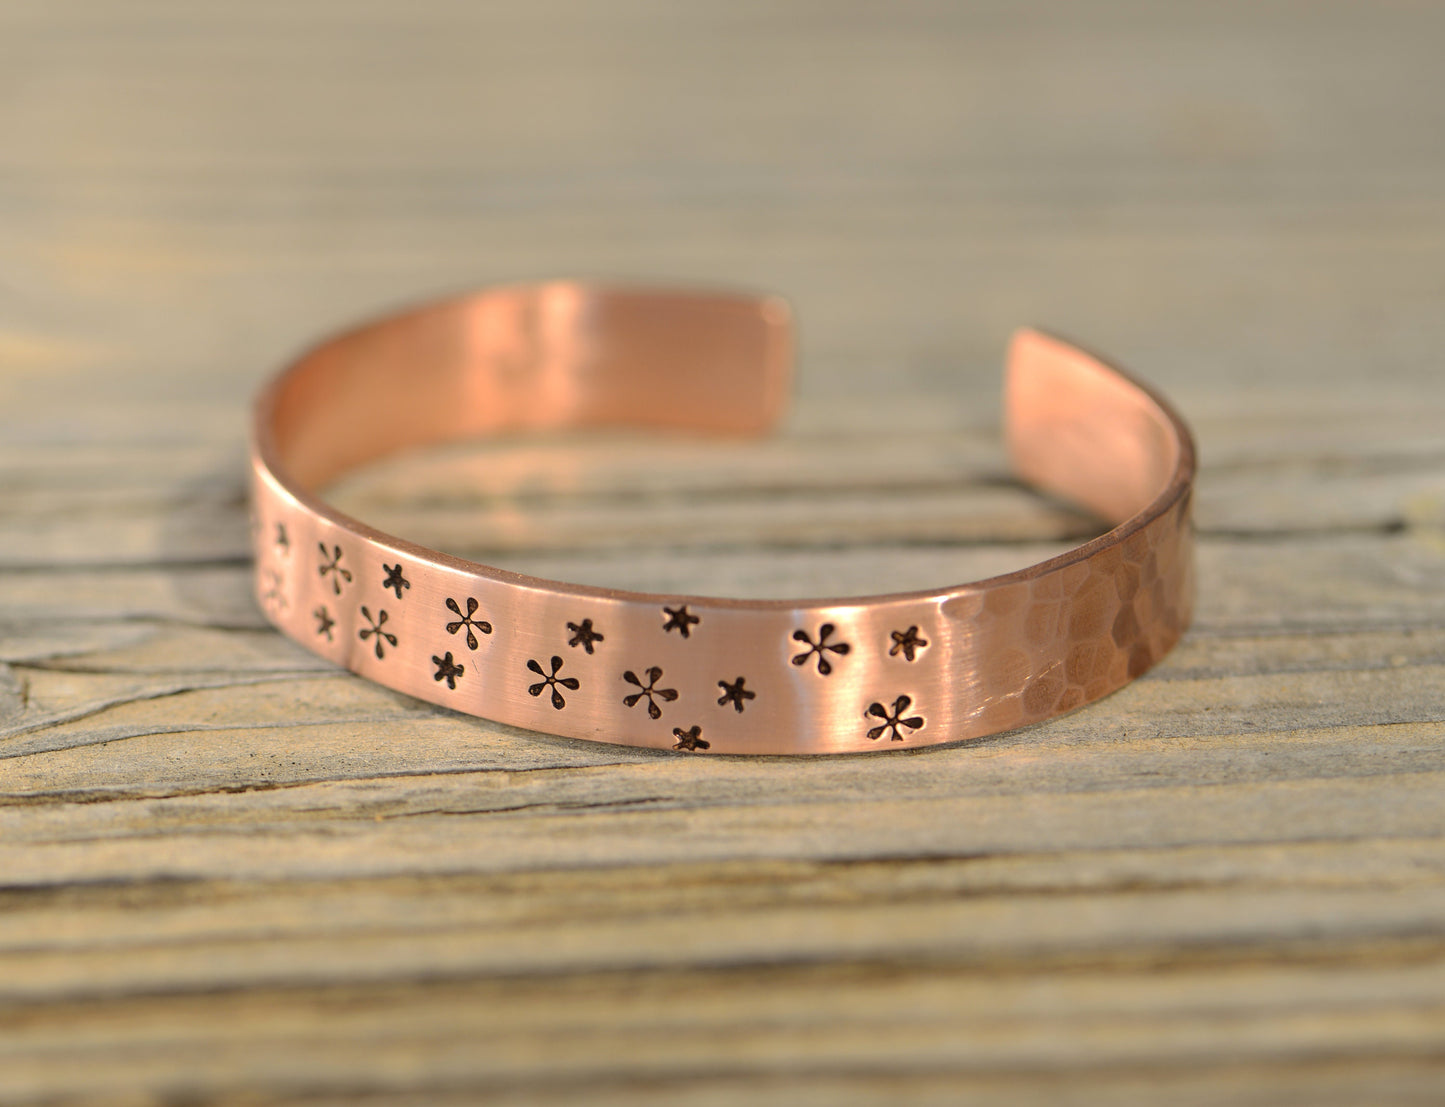 Copper cuff bracelet with small flowers and a hammered texture